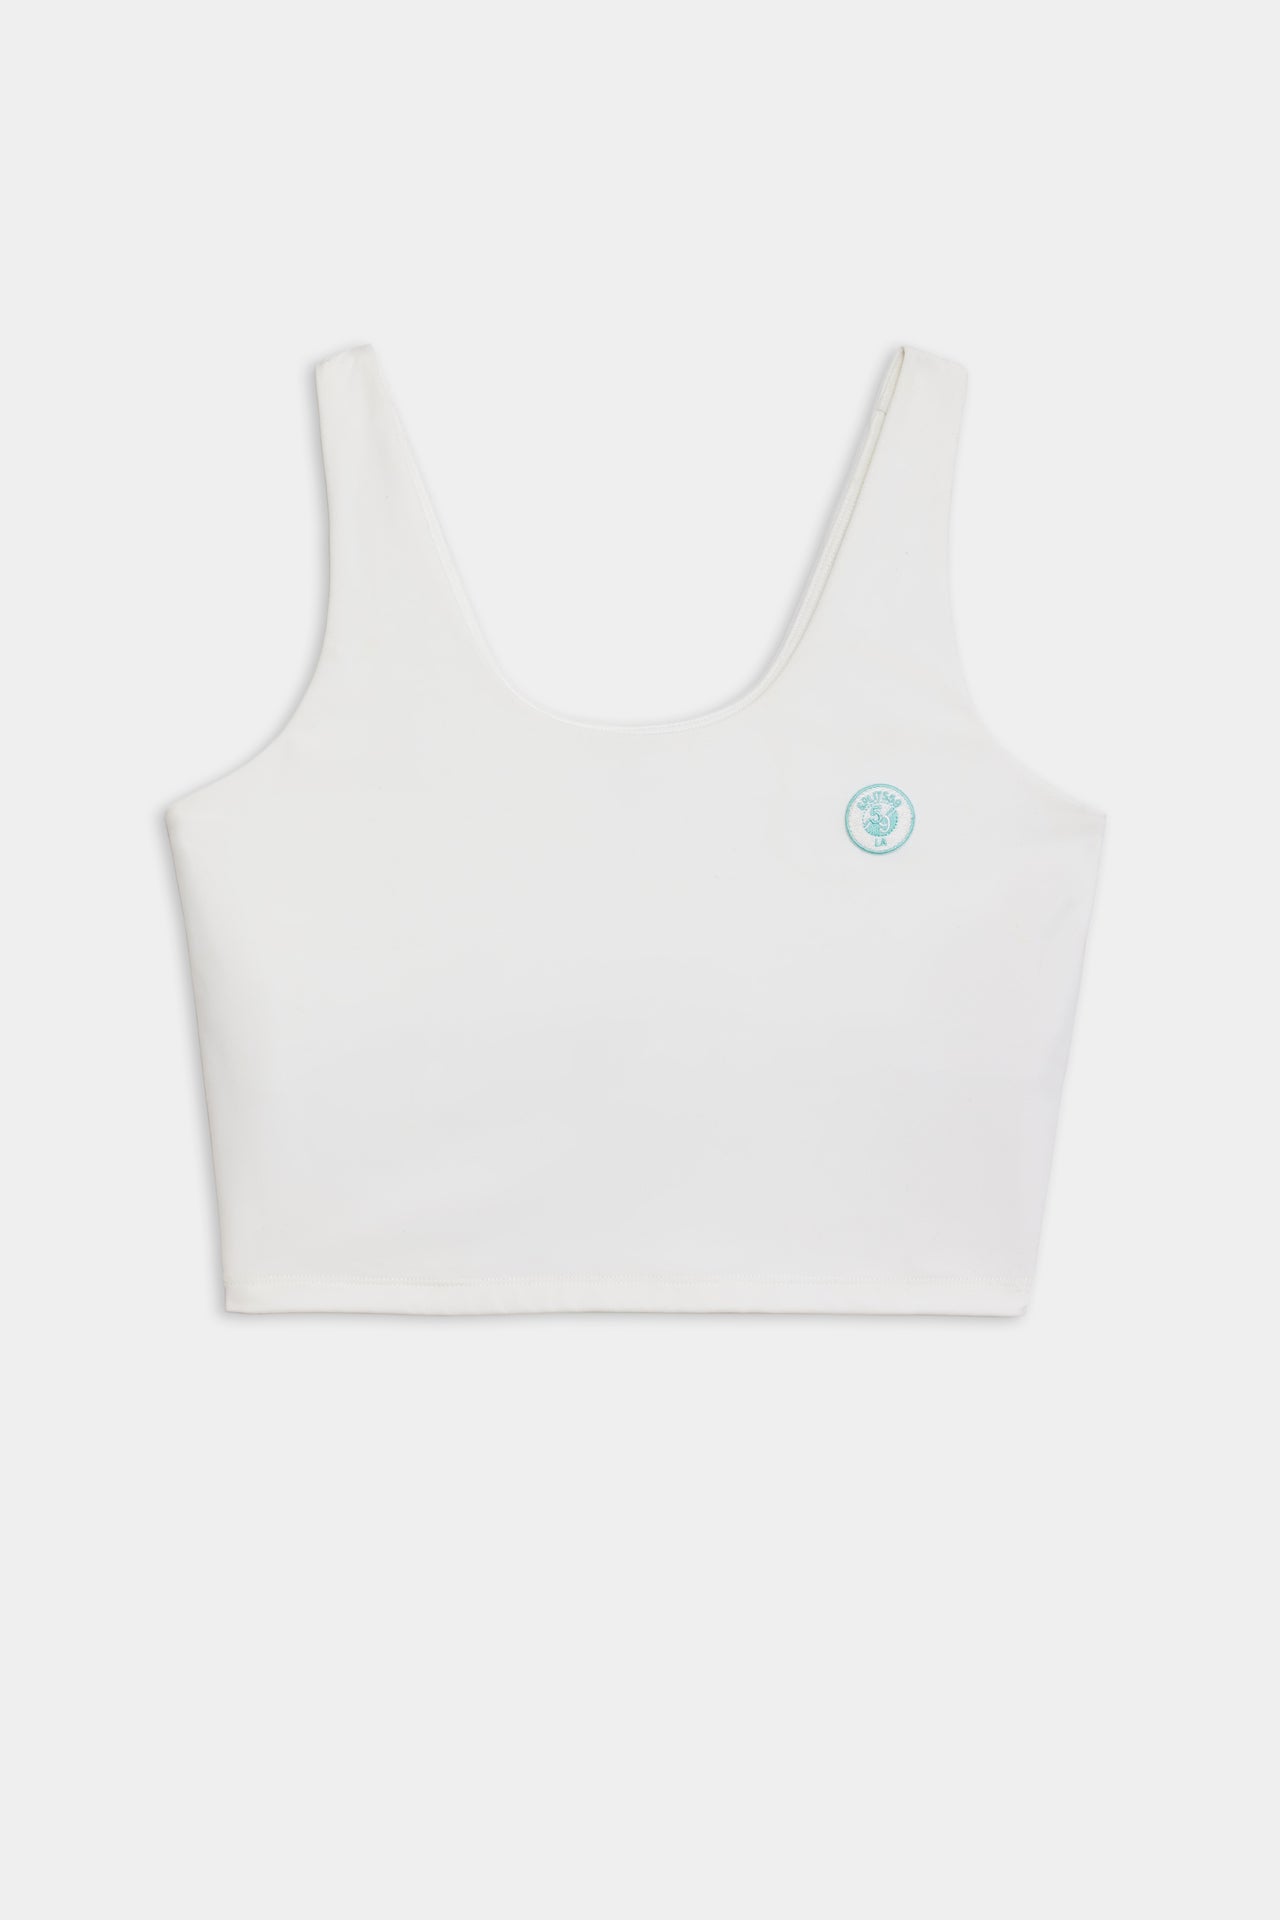 Front flat view of white tank bra with teal logo 